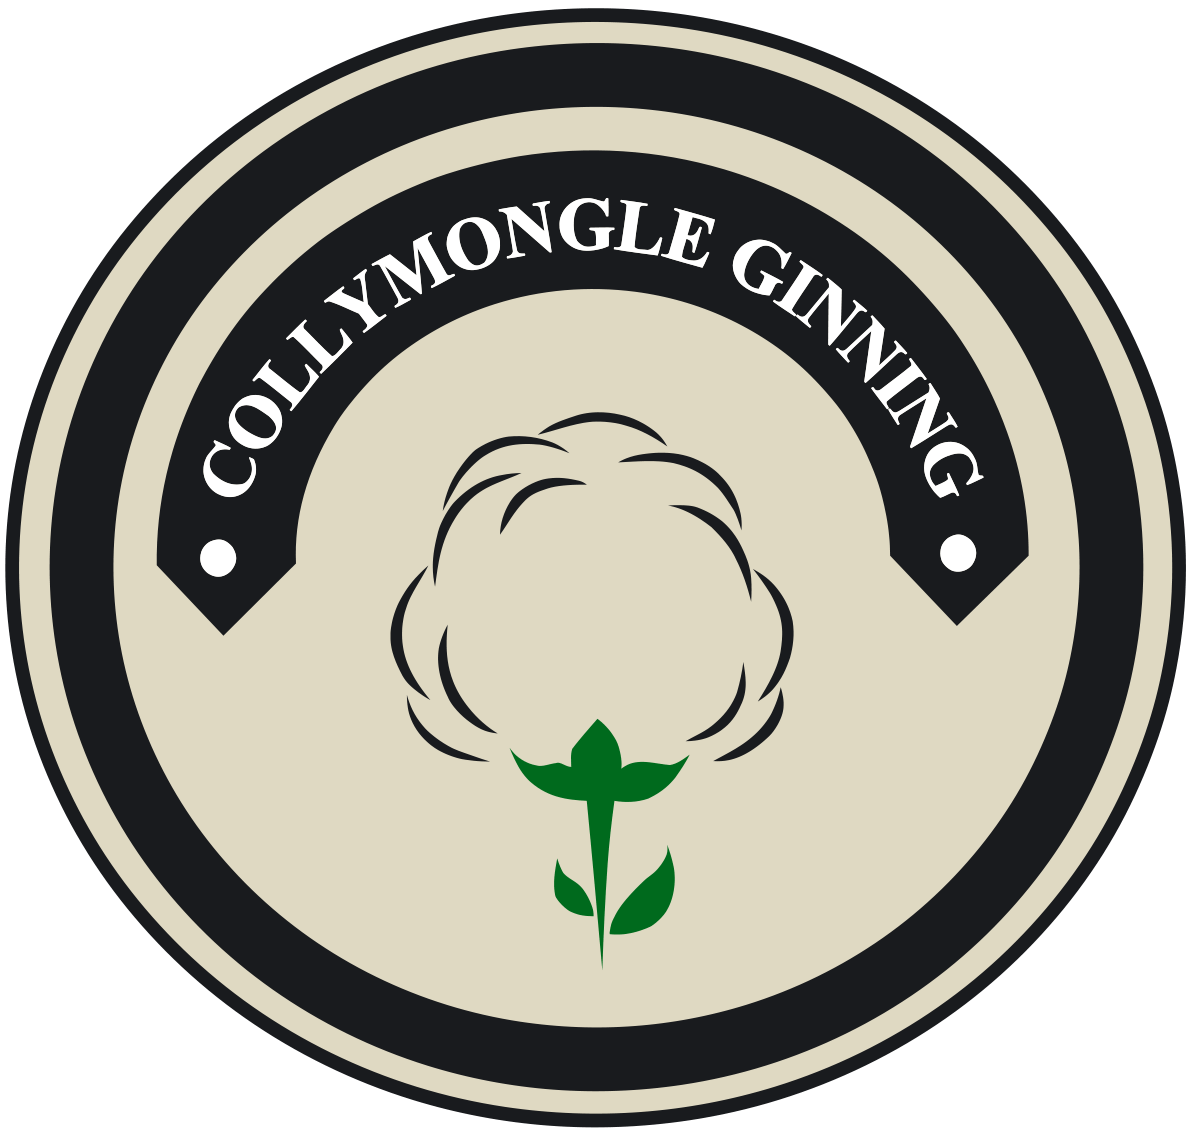 A logo for collymongle ginning with a cotton plant in the center